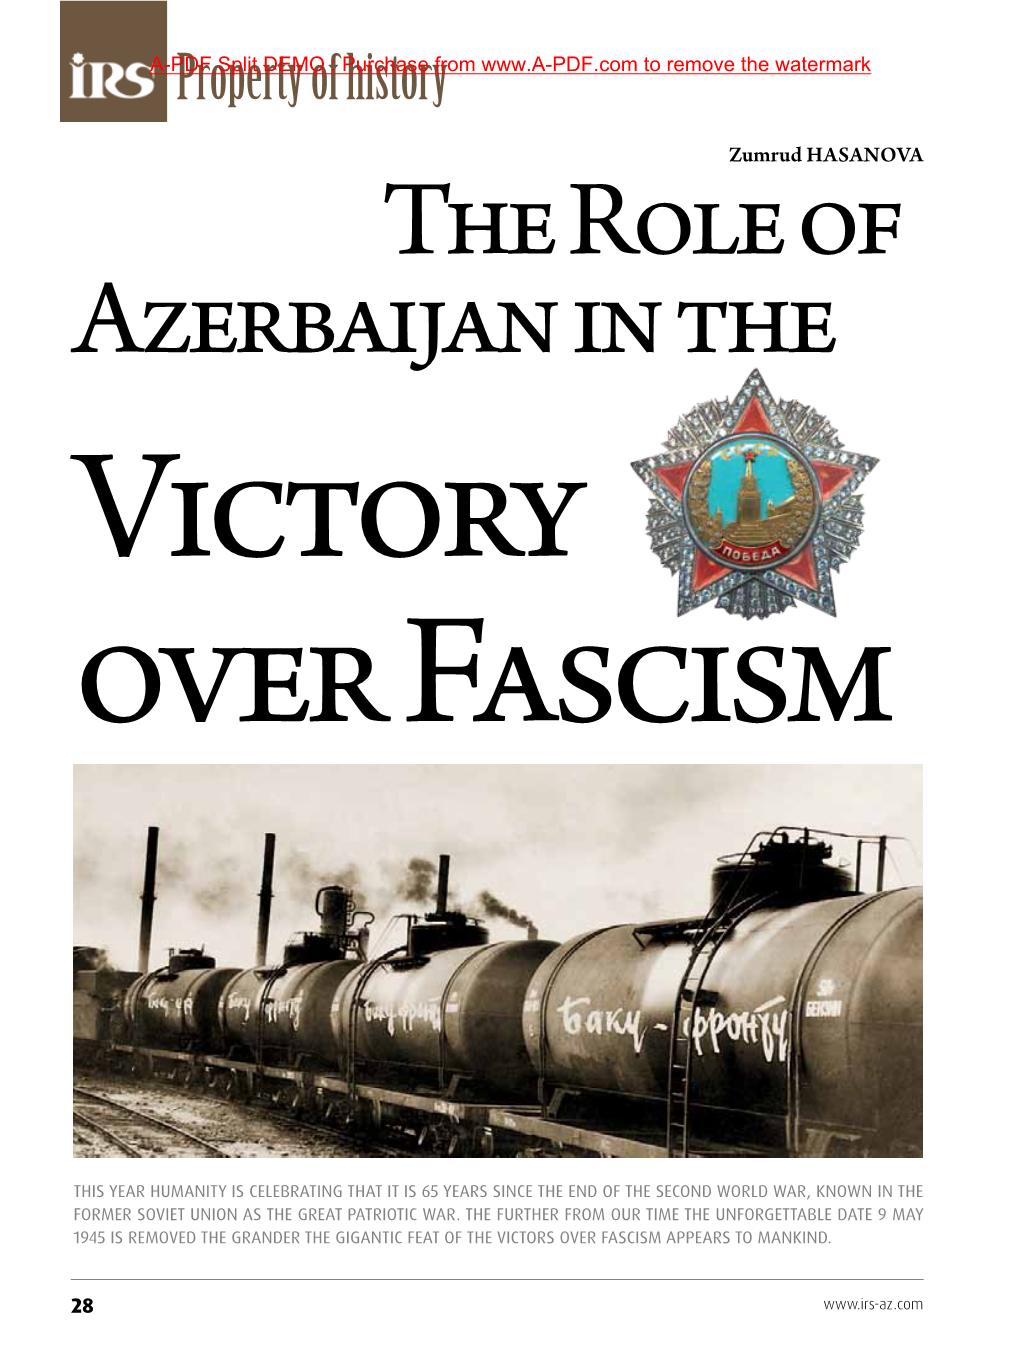 The Role of Azerbaijan in the Victory Over Fascism